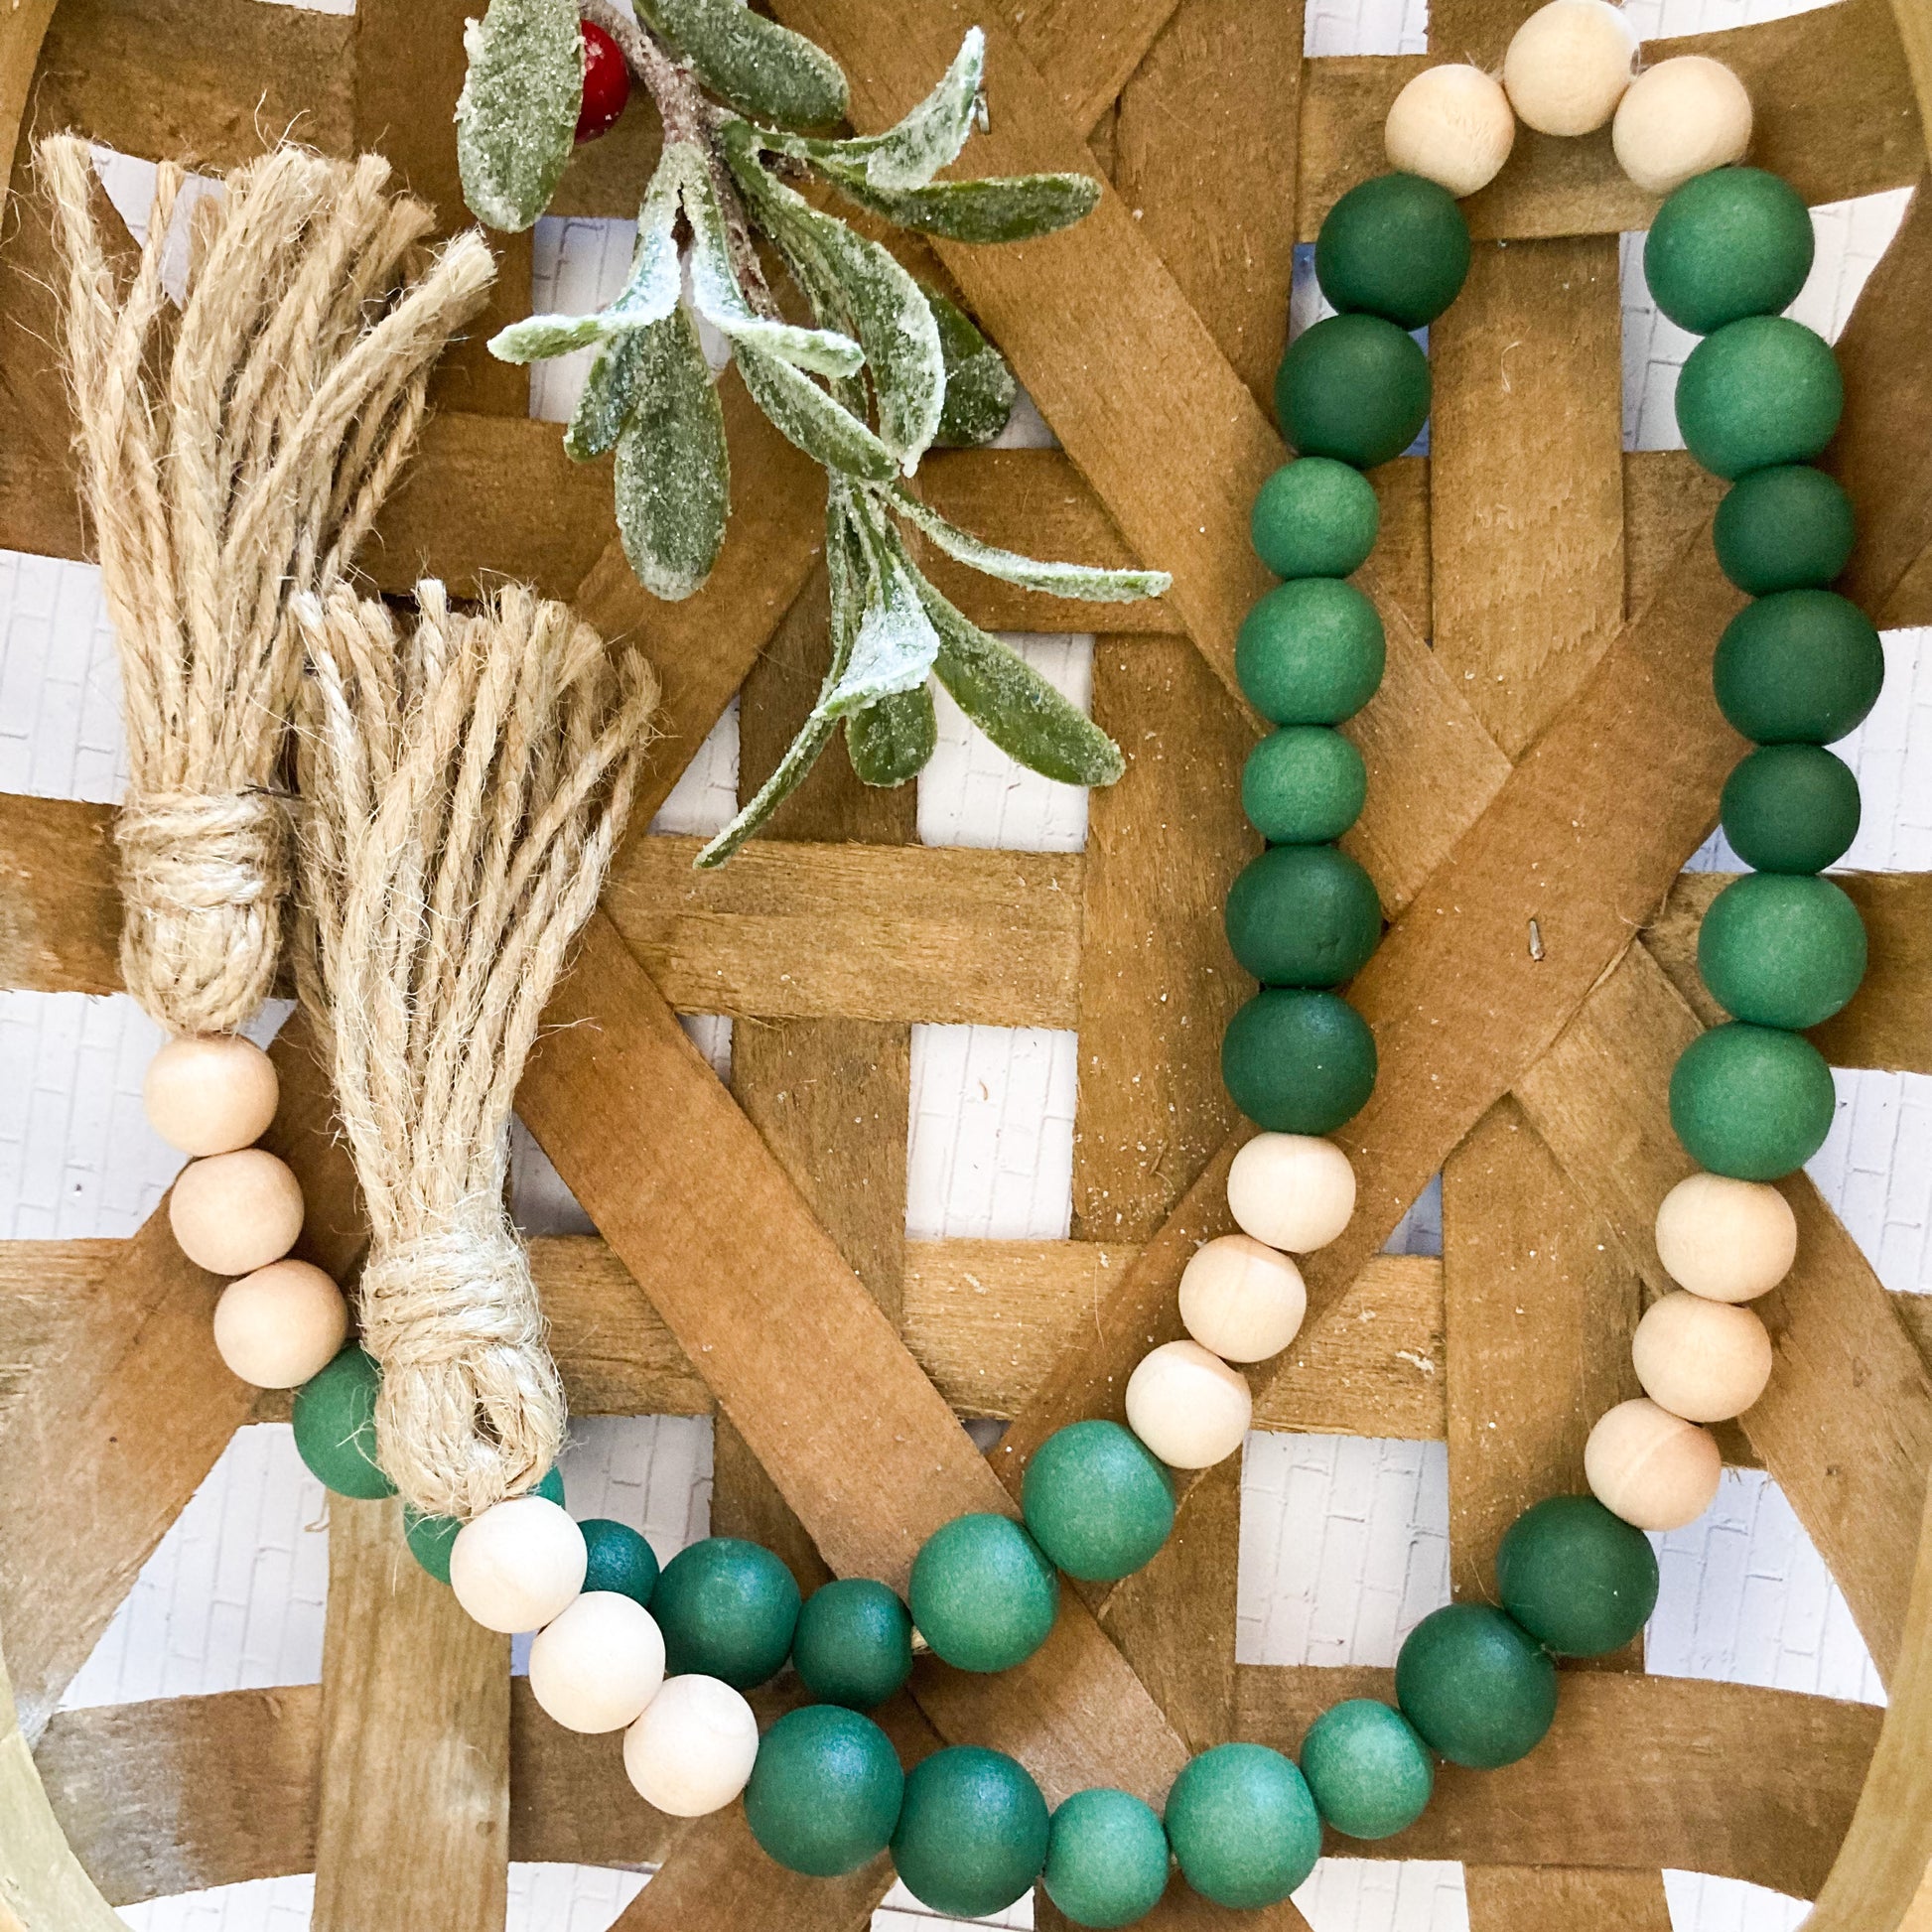 handmade wood bead garland 30 inches in total length two tones of green and natural beading with jute twine brown tassels 